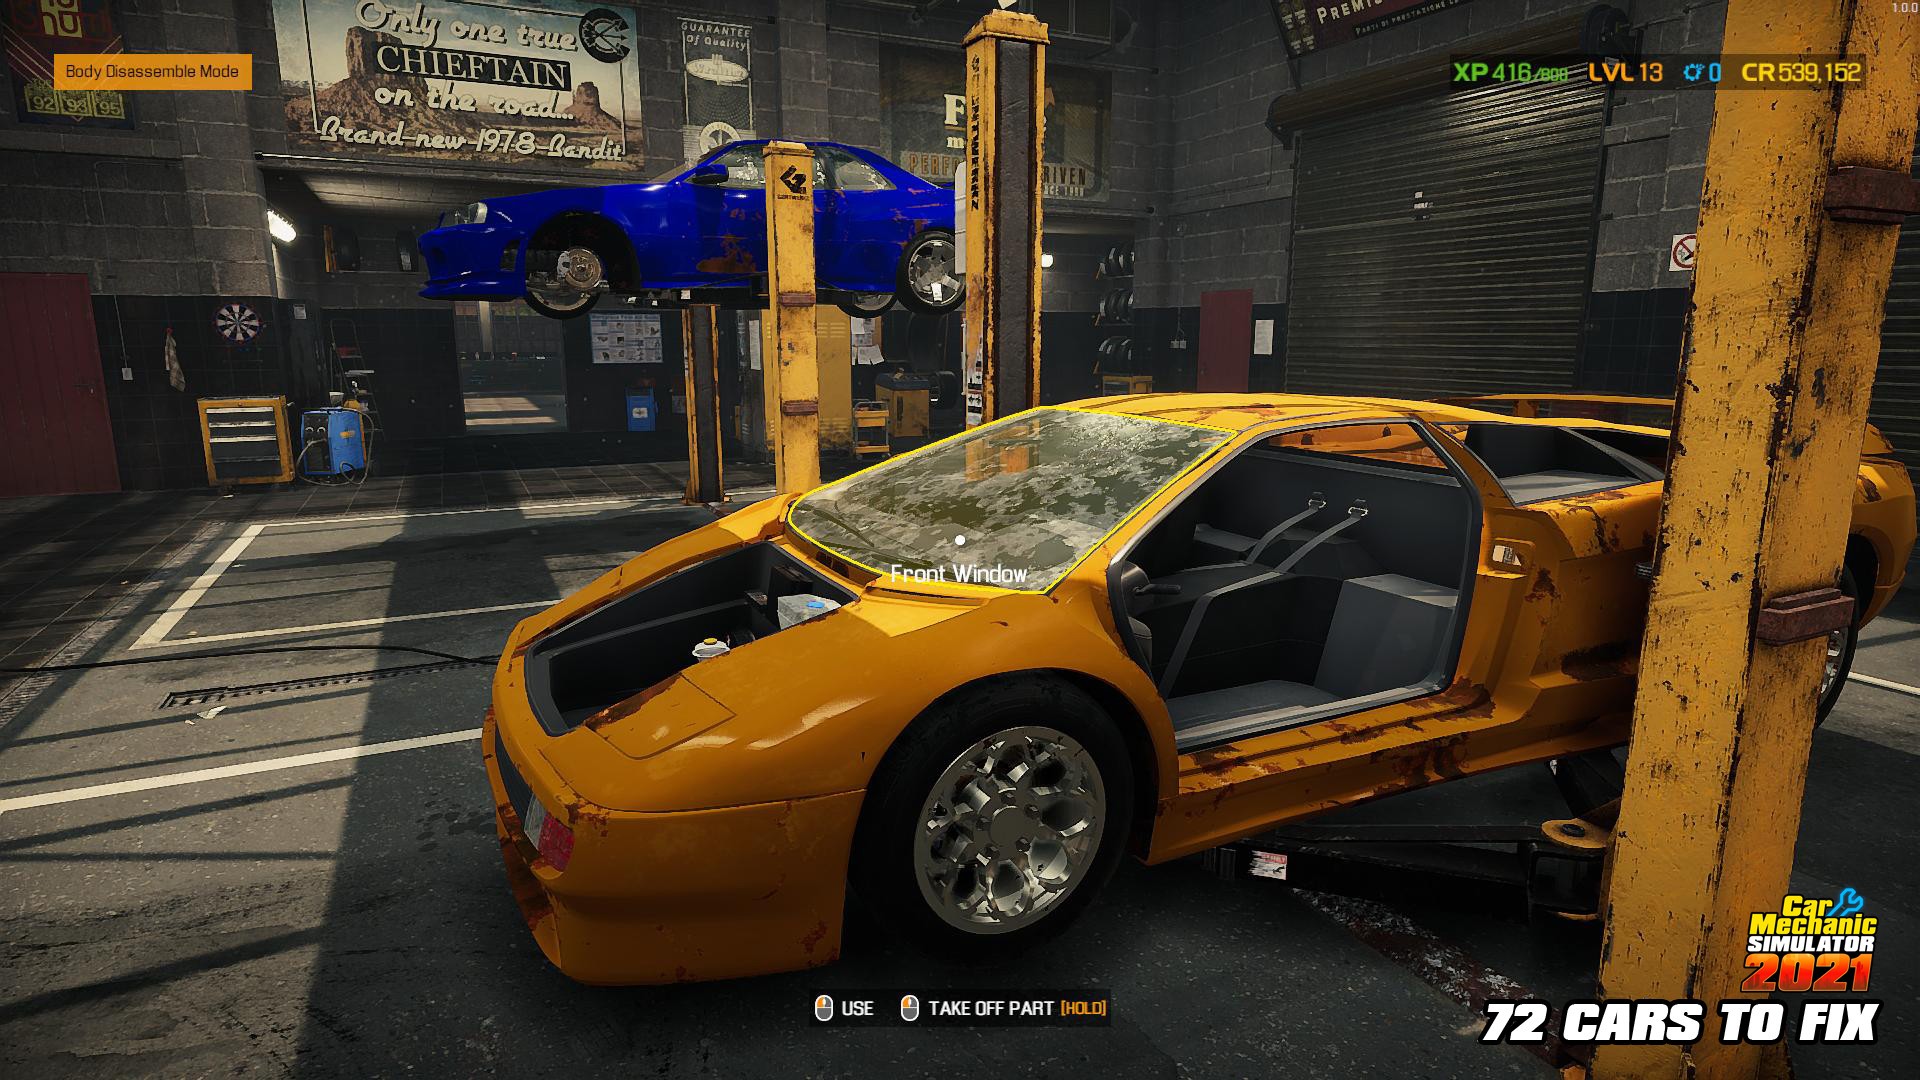 Learn and Practice Fixing Cars With the Realistic Car Mechanic